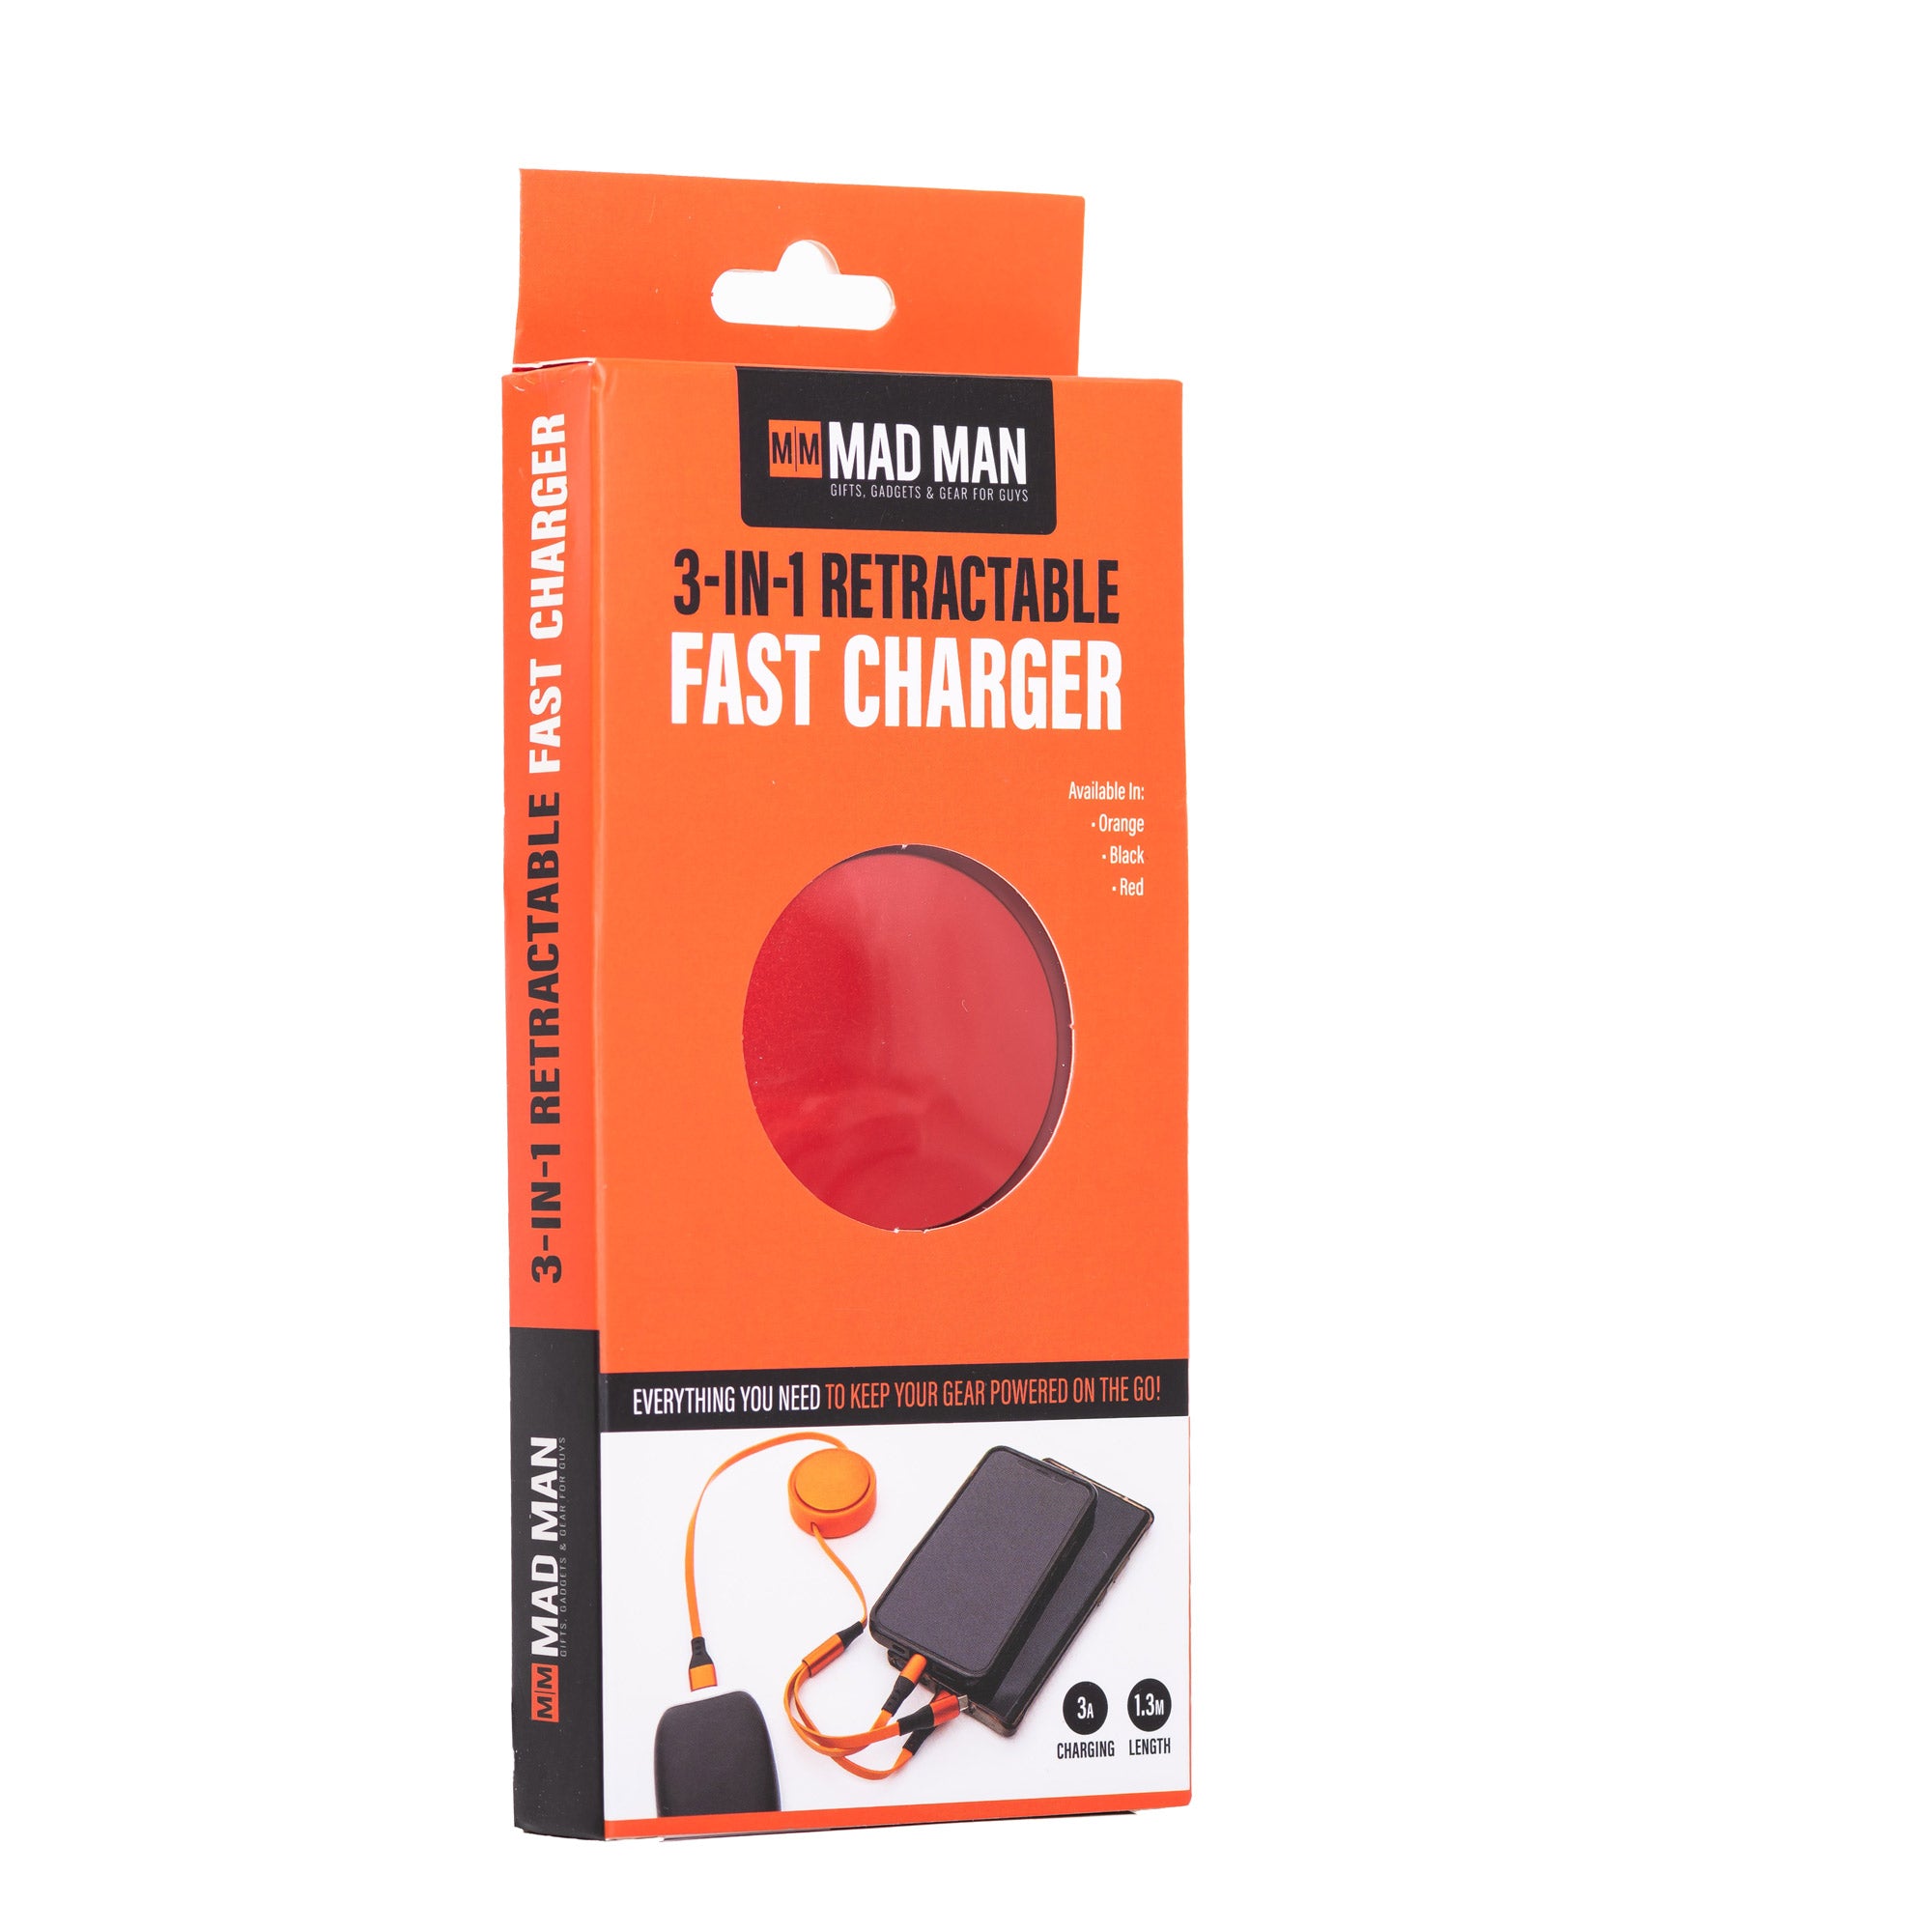 Retractable Fast Chargers